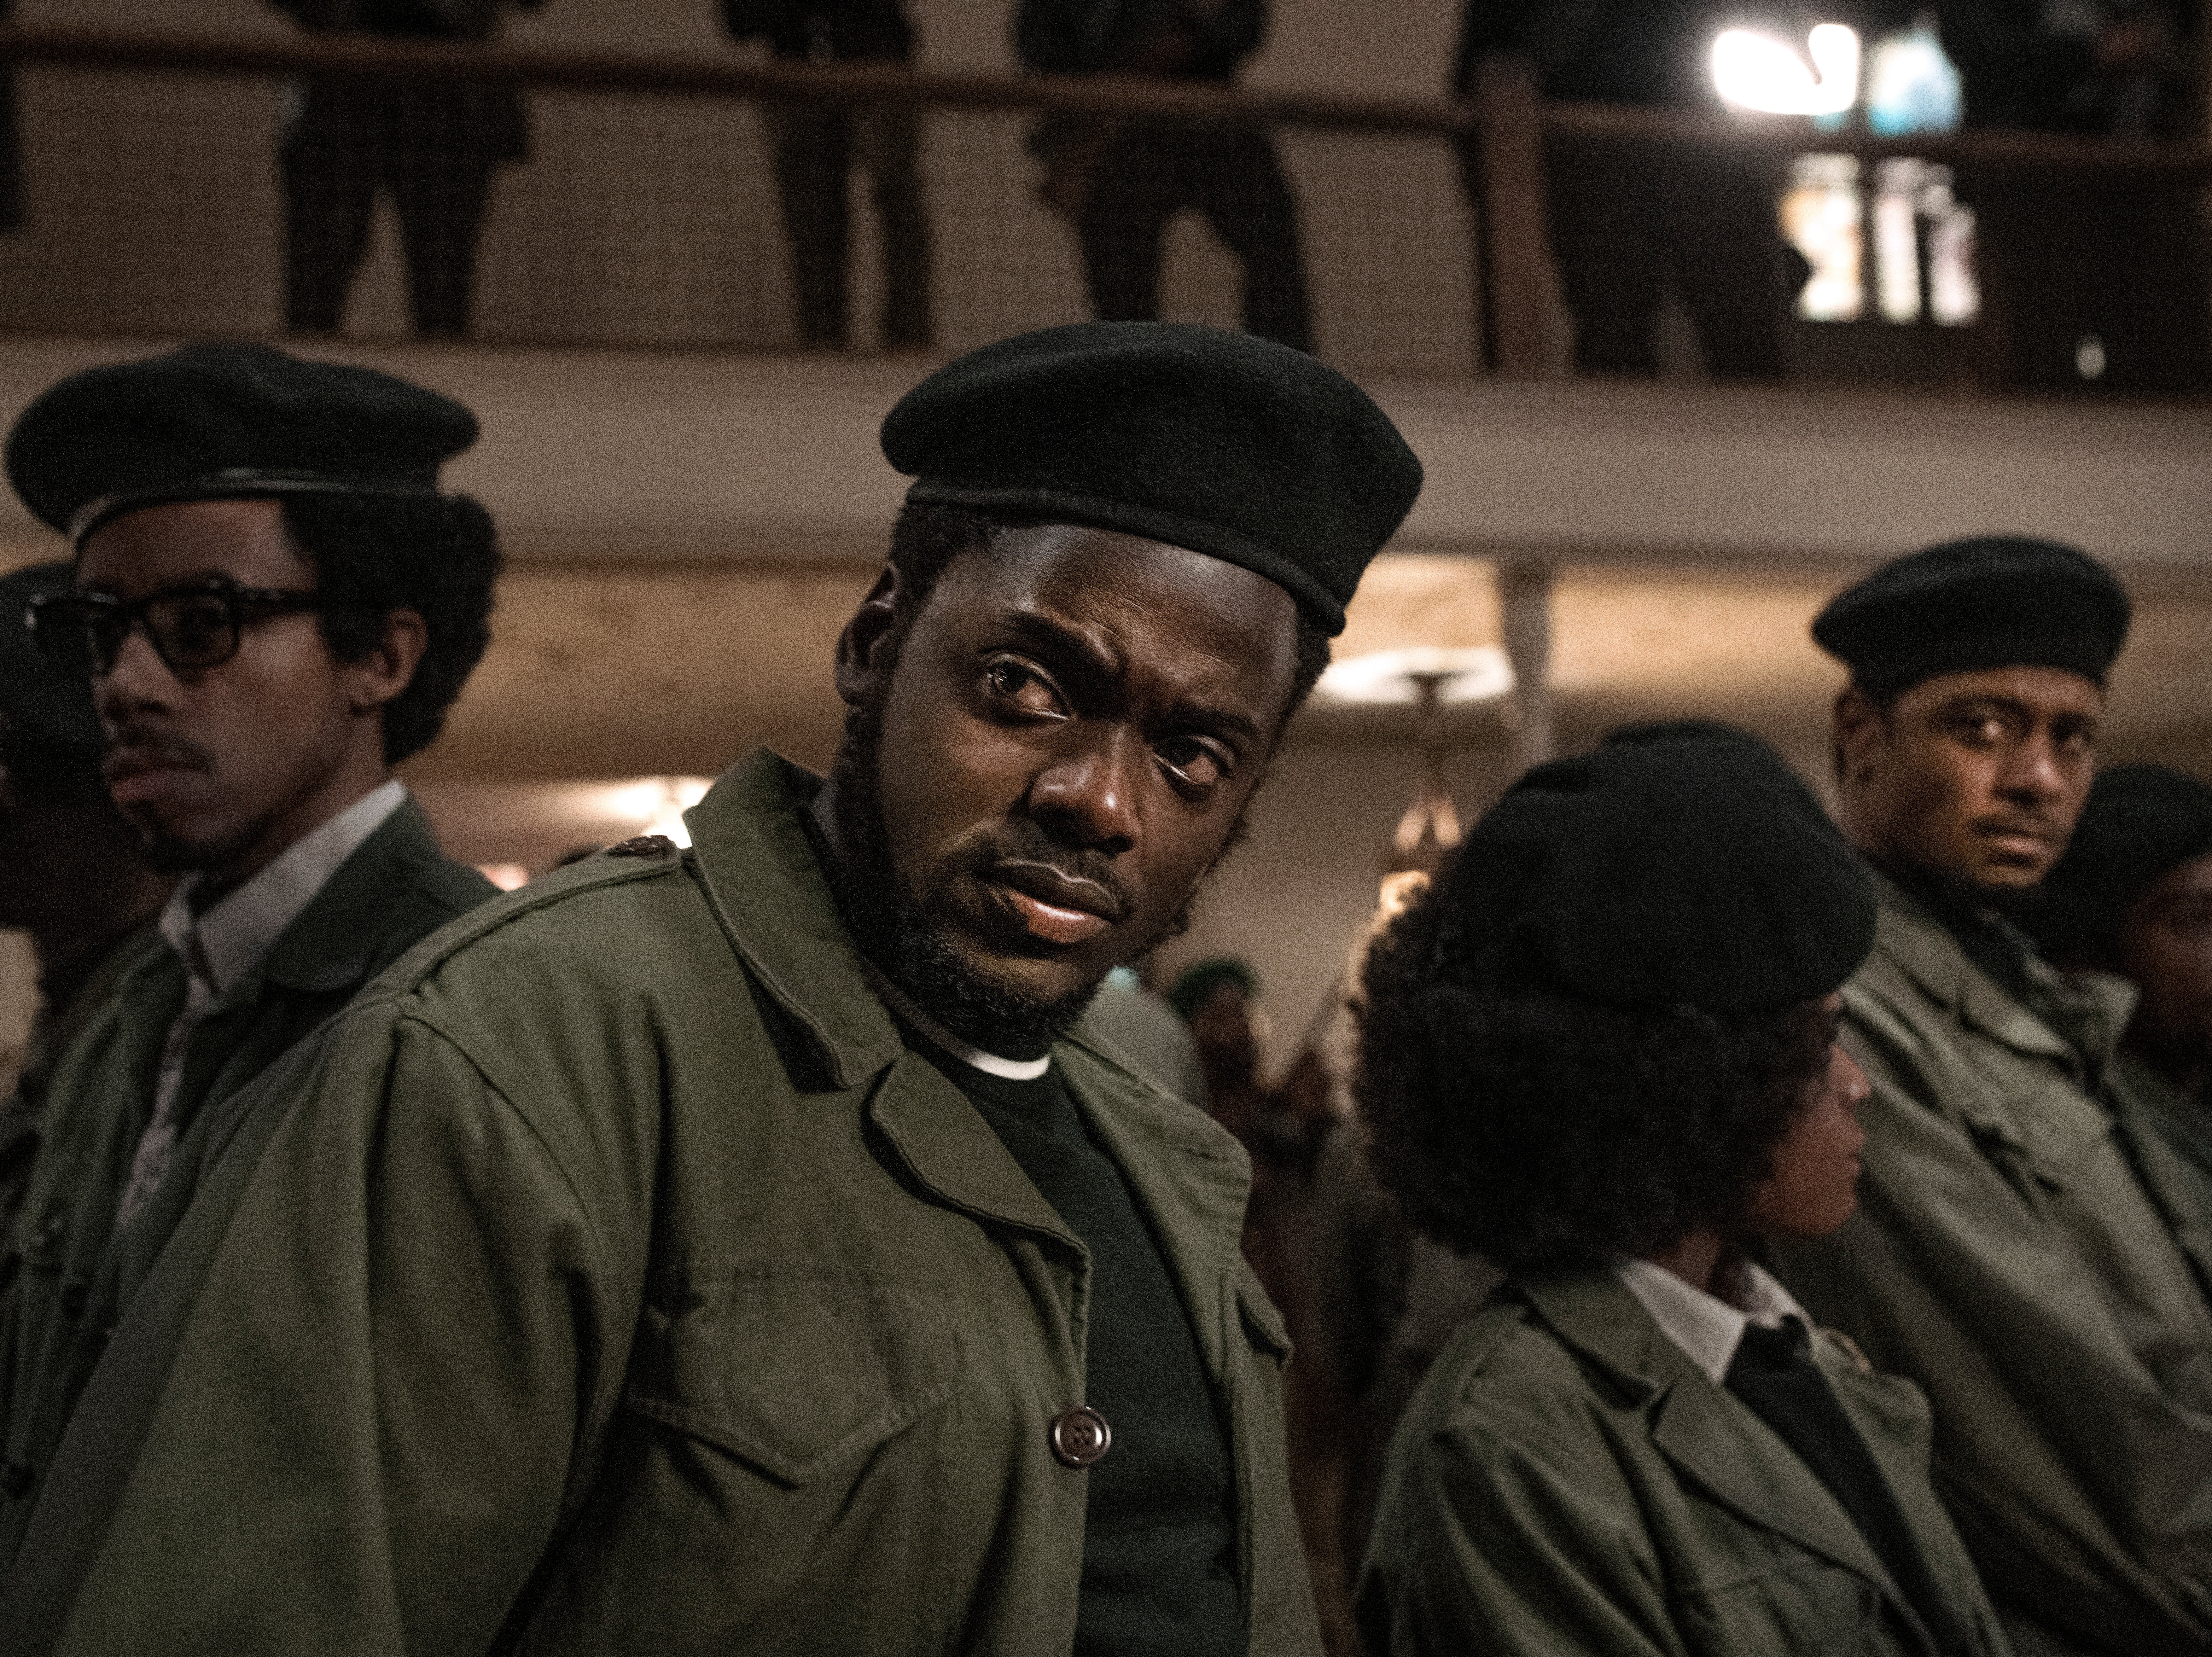 Daniel Kaluuya gives a career-best performance in the Fred Hampton biopic Judas and the Black Messiah